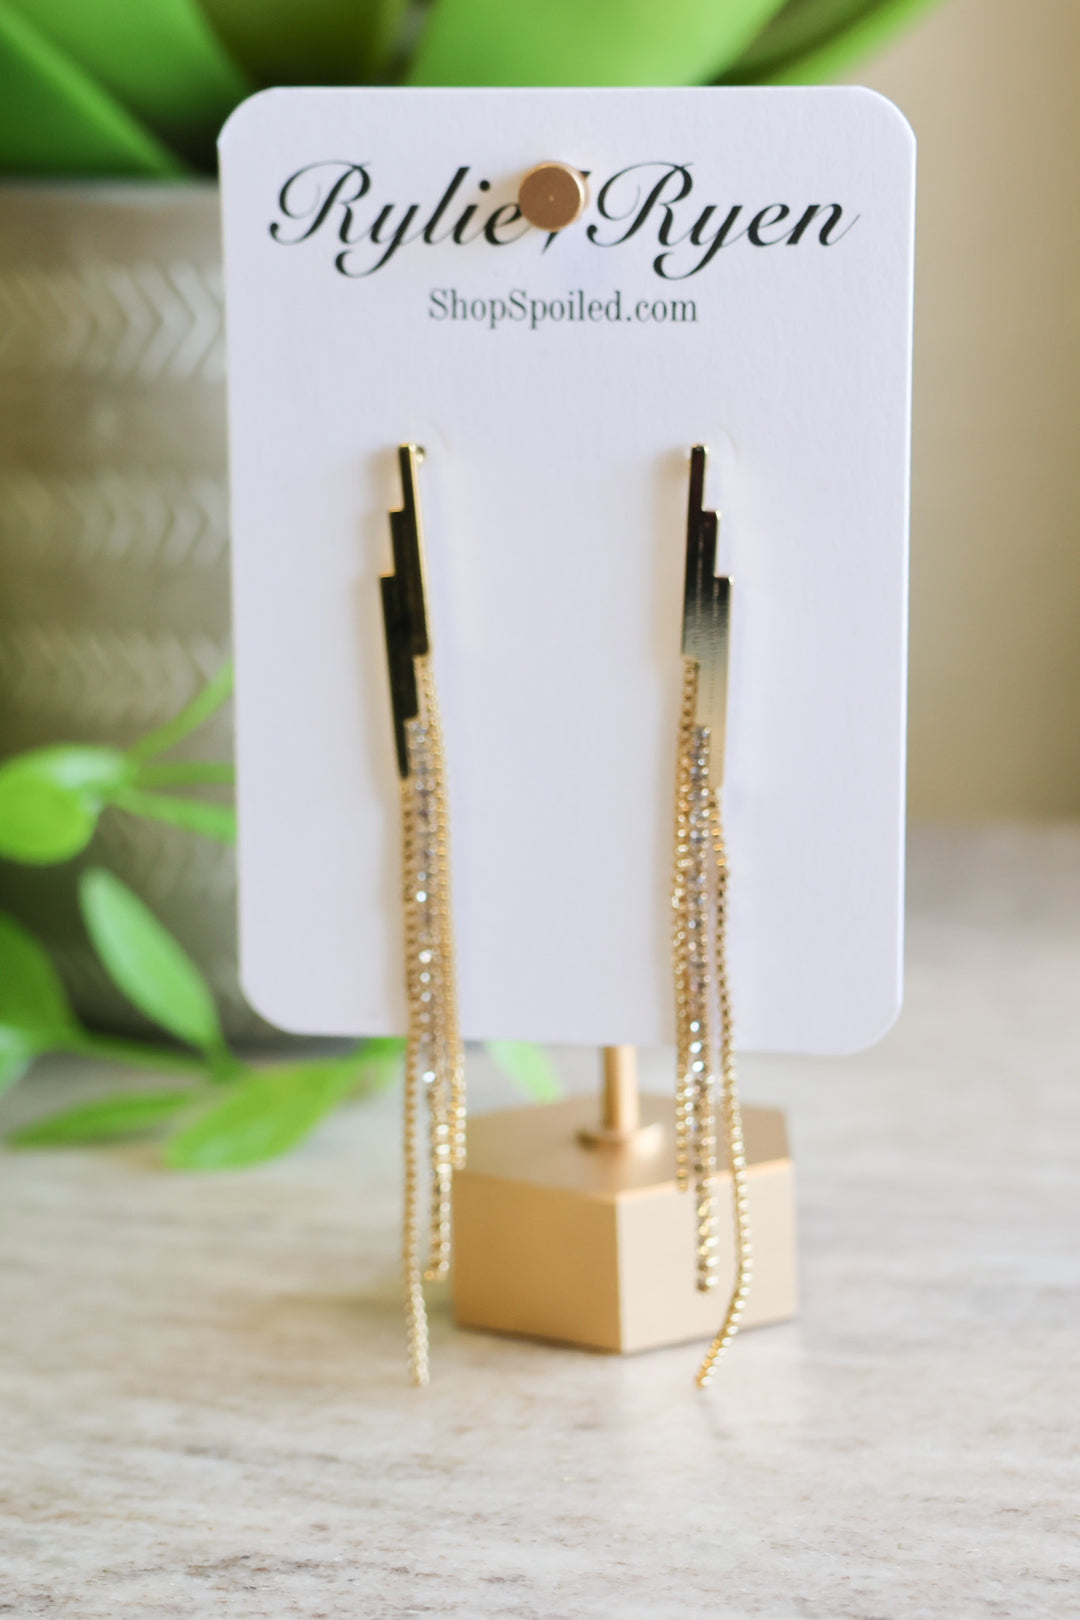 Dramatic Drop Earrings in Gold - ShopSpoiled